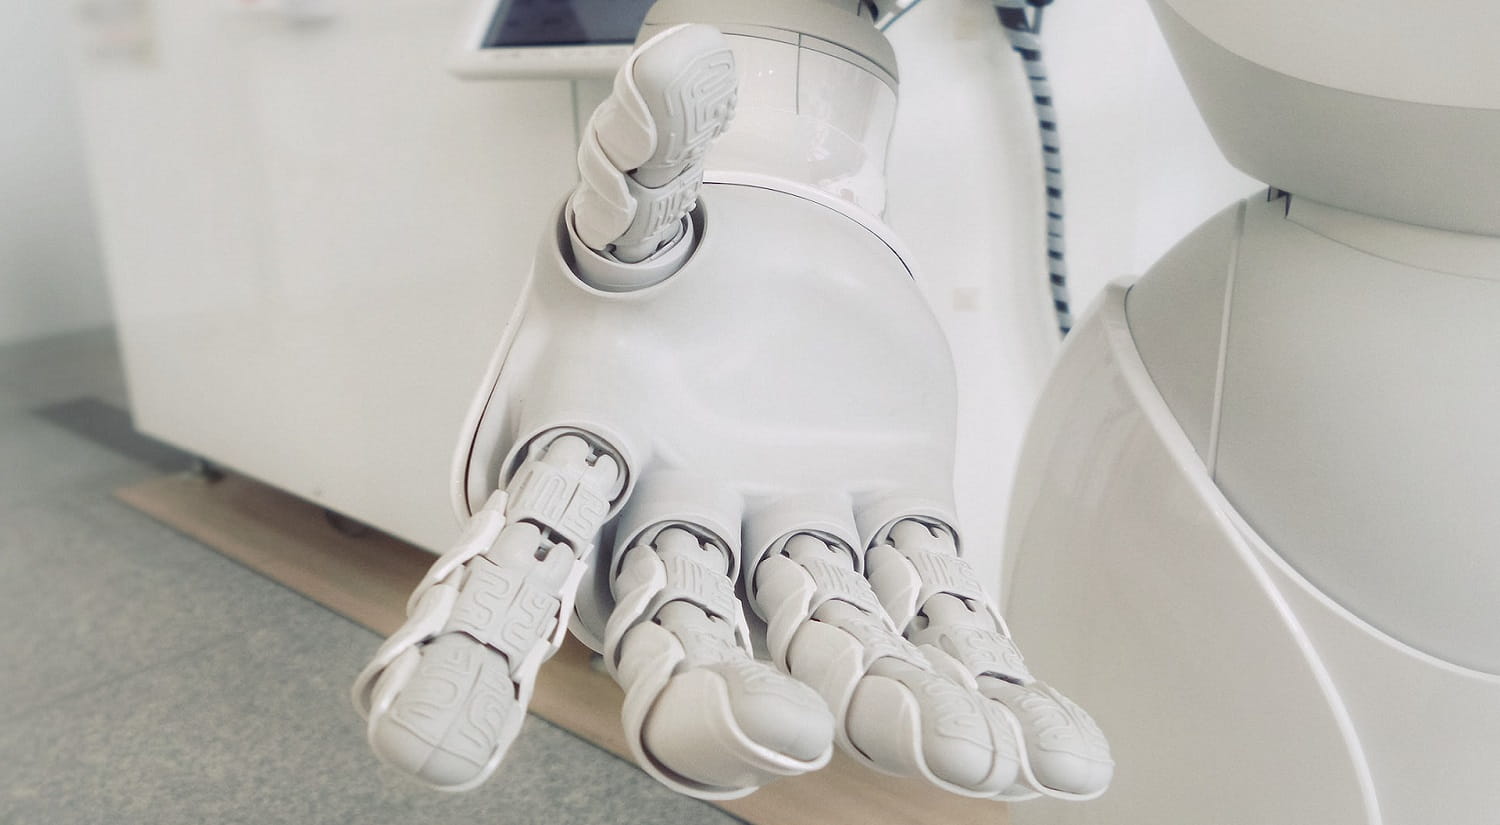 The hand of a robot, representing machine learning, digitalisation and the future of work.